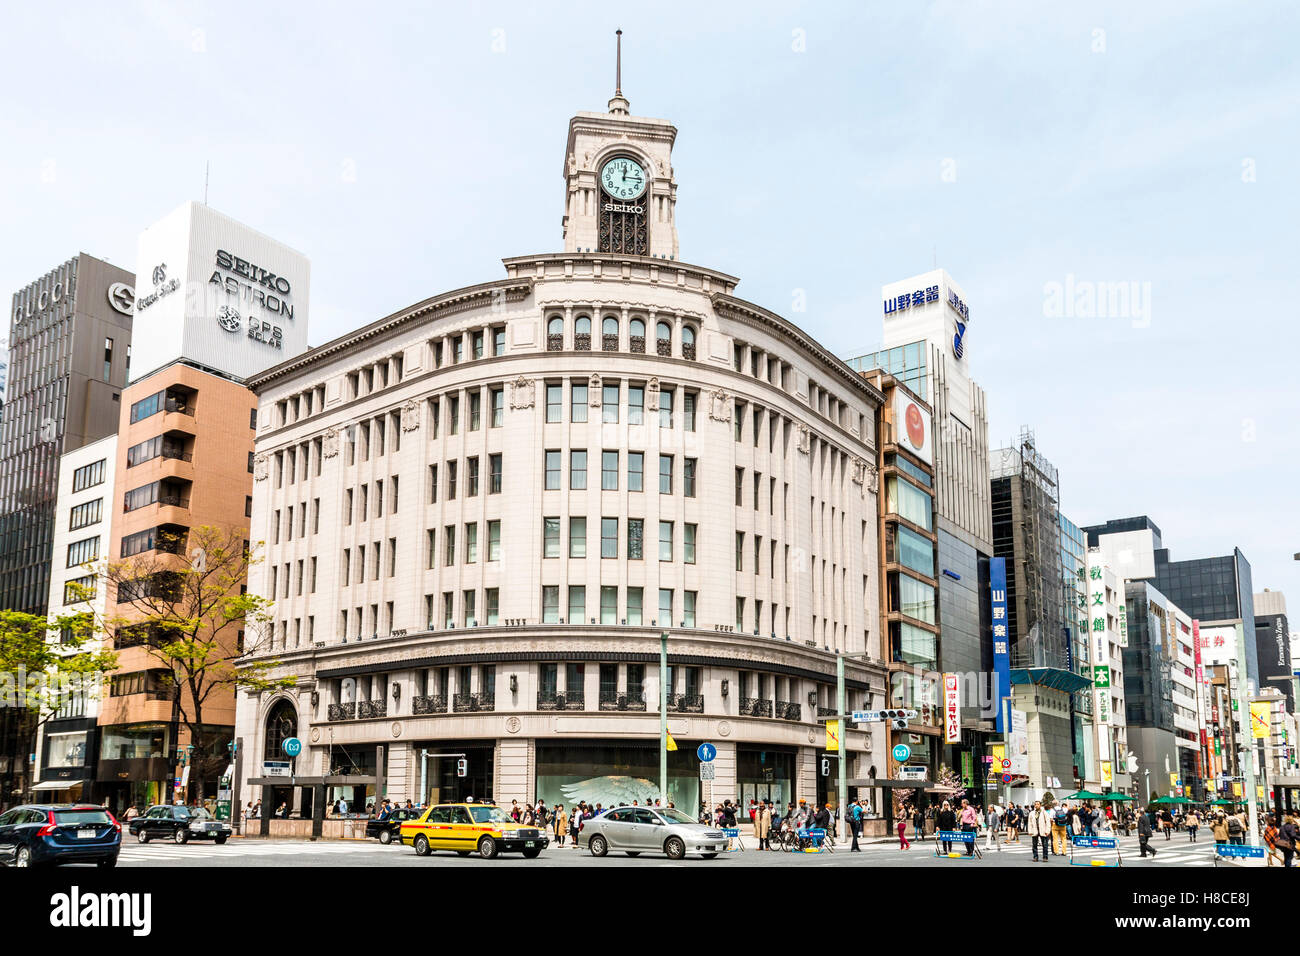 Japan, Tokyo, Ginza. Famous landmark, the corner Wako Department store  building with its iconic roof clock tower, seen from across street. Daytime  Stock Photo - Alamy